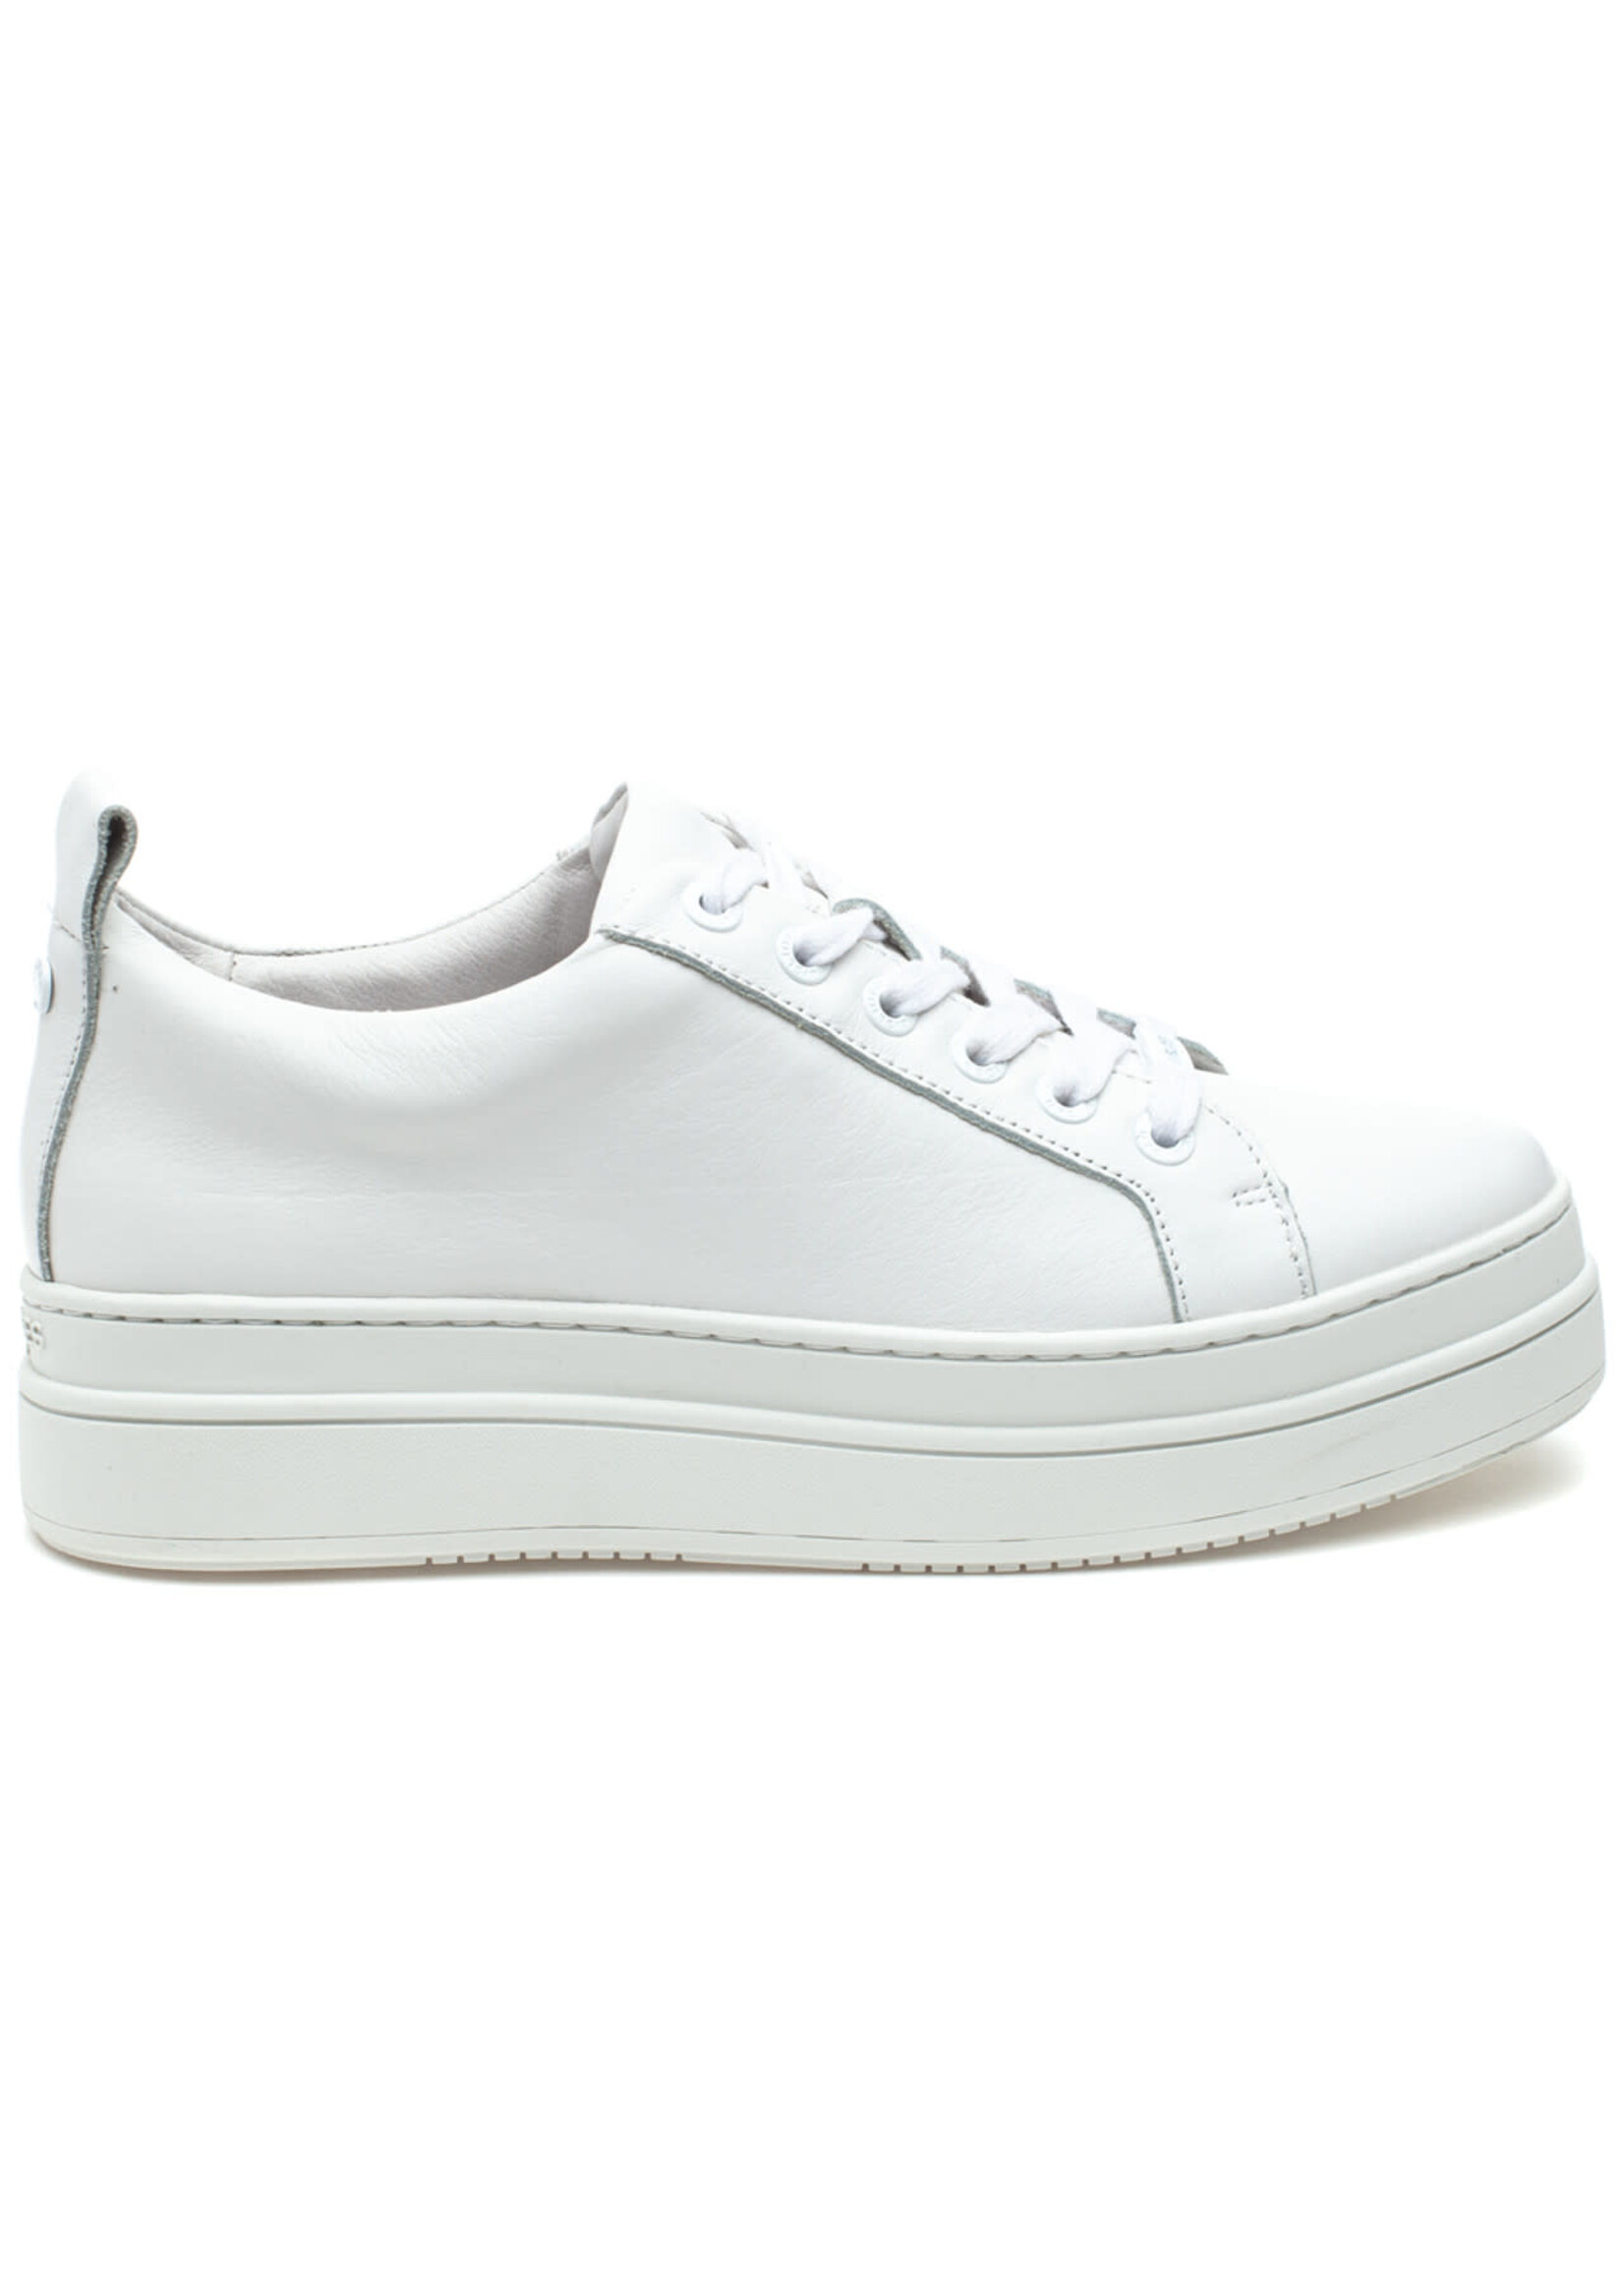 JSlides NYC NOCA White Leather Sneaker by JSlides NYC